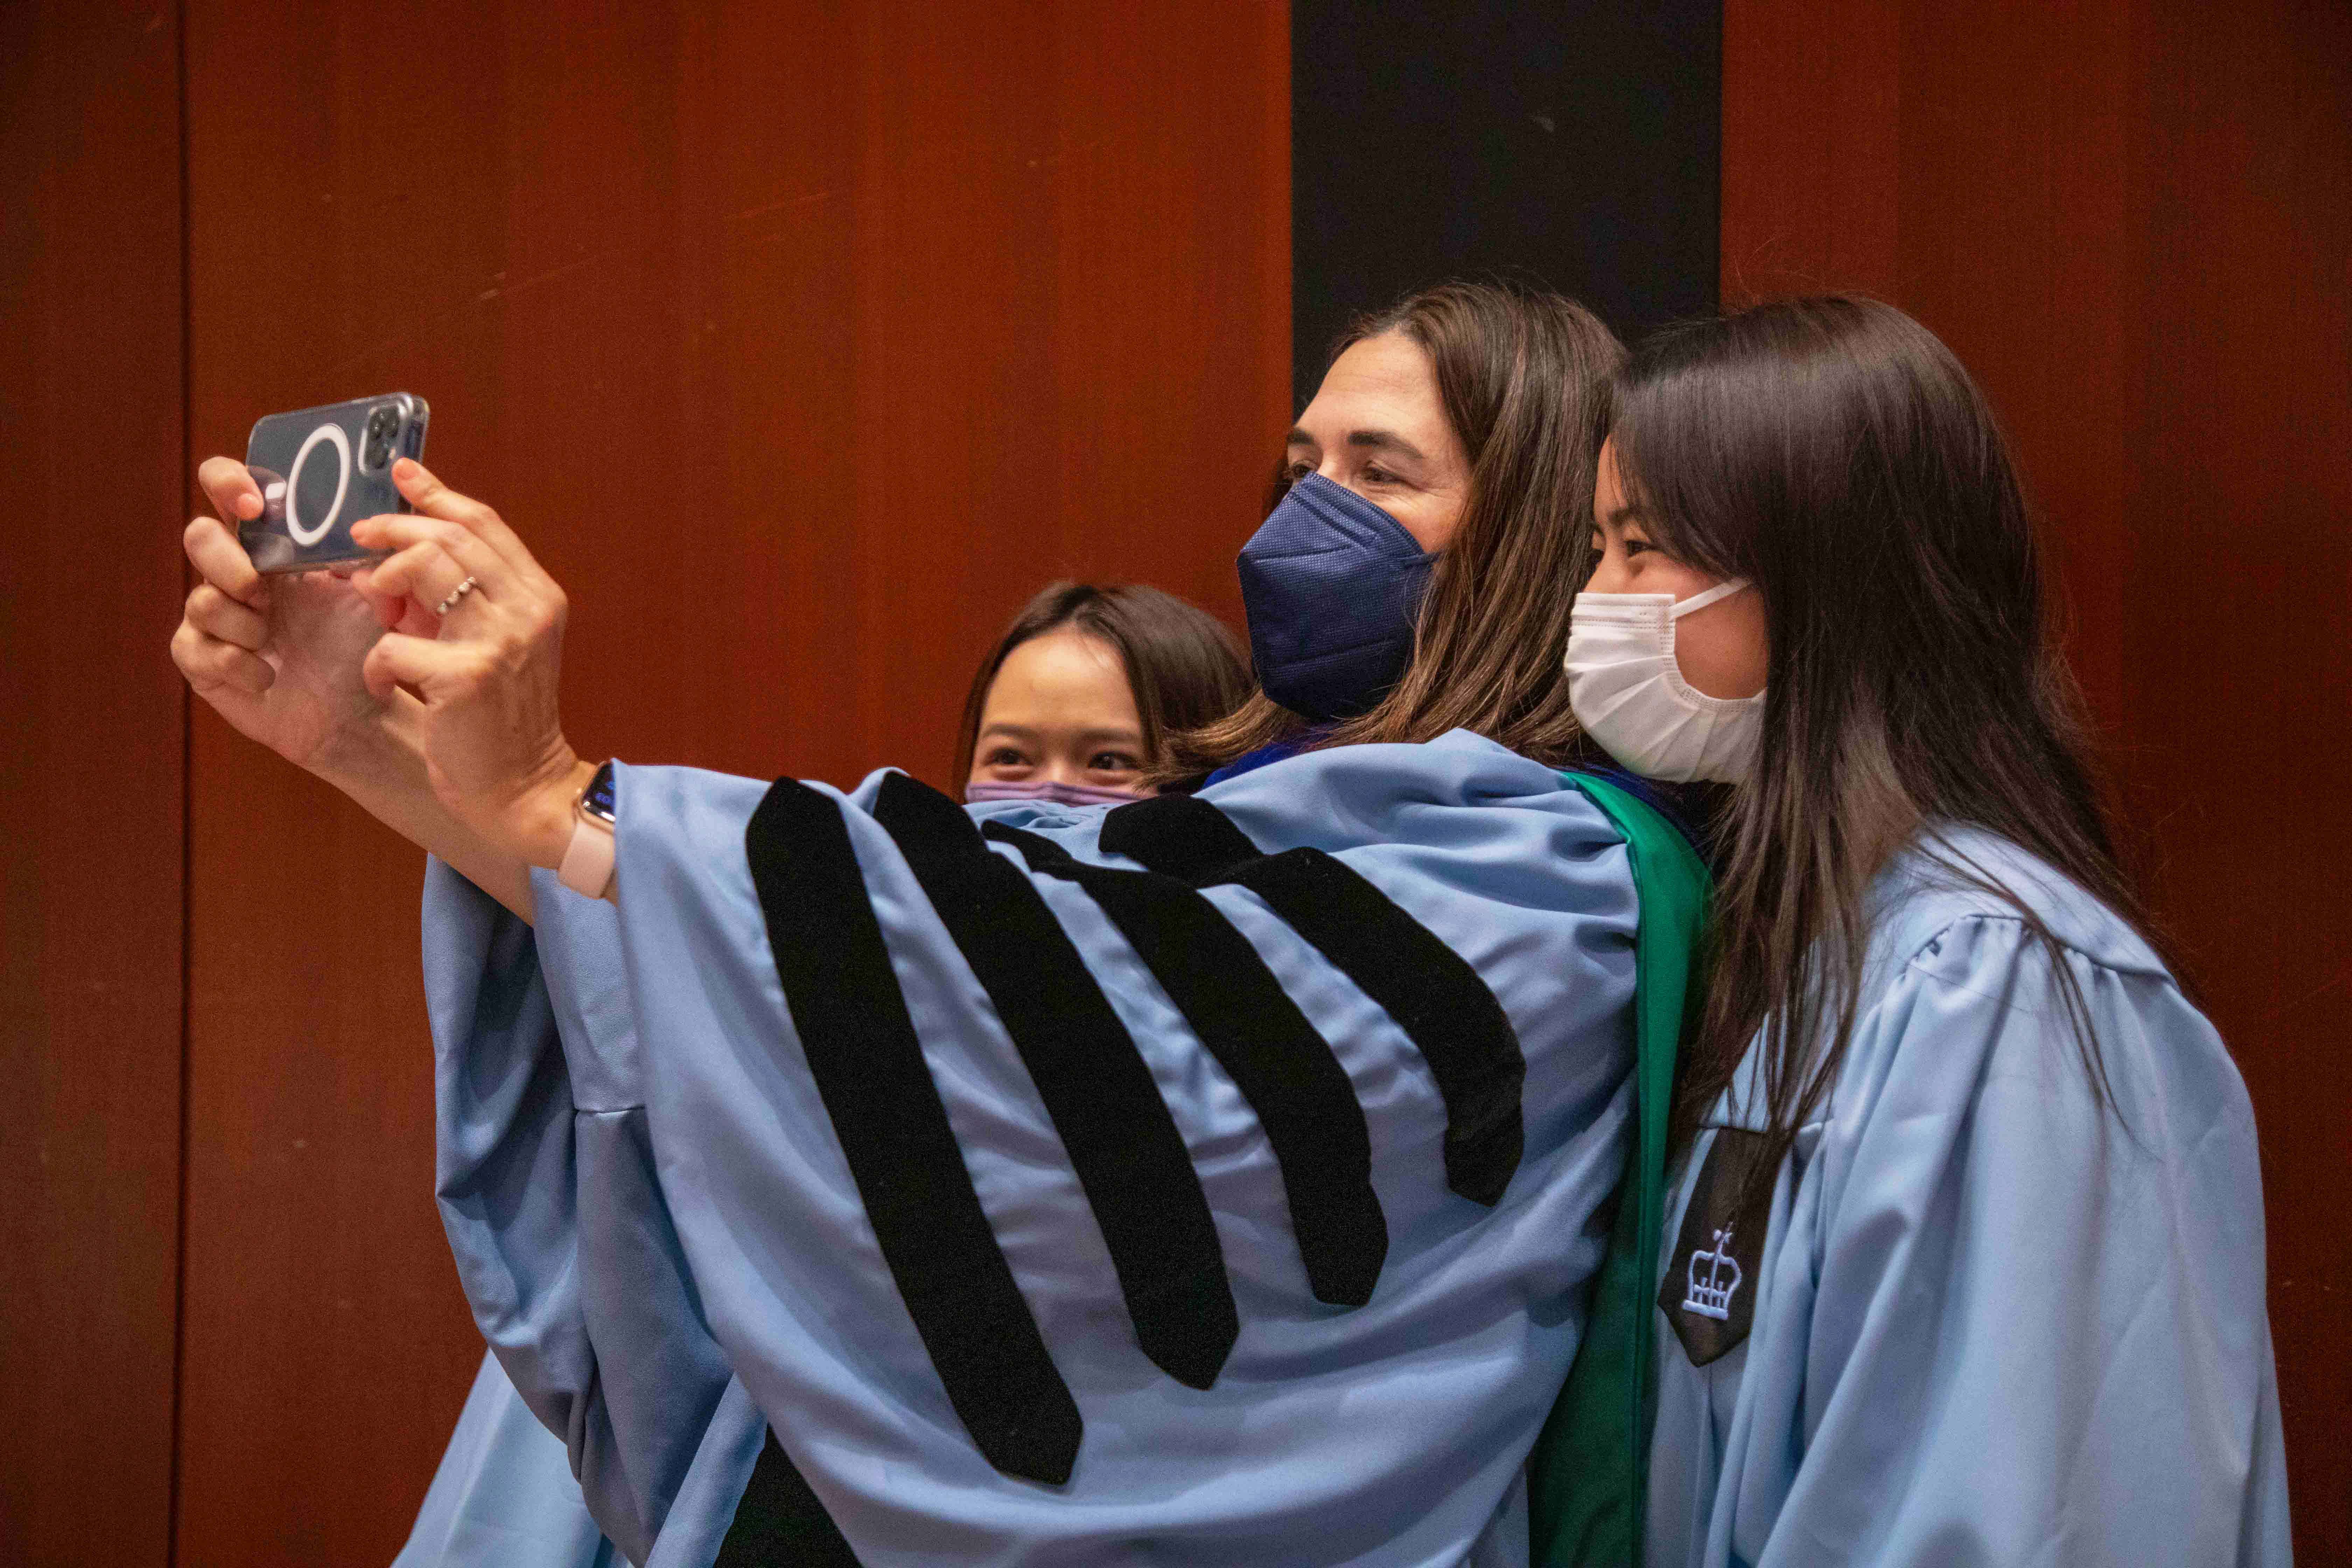 President Beilock holds up an iPhone to take a selfie with two students in their caps and gowns.